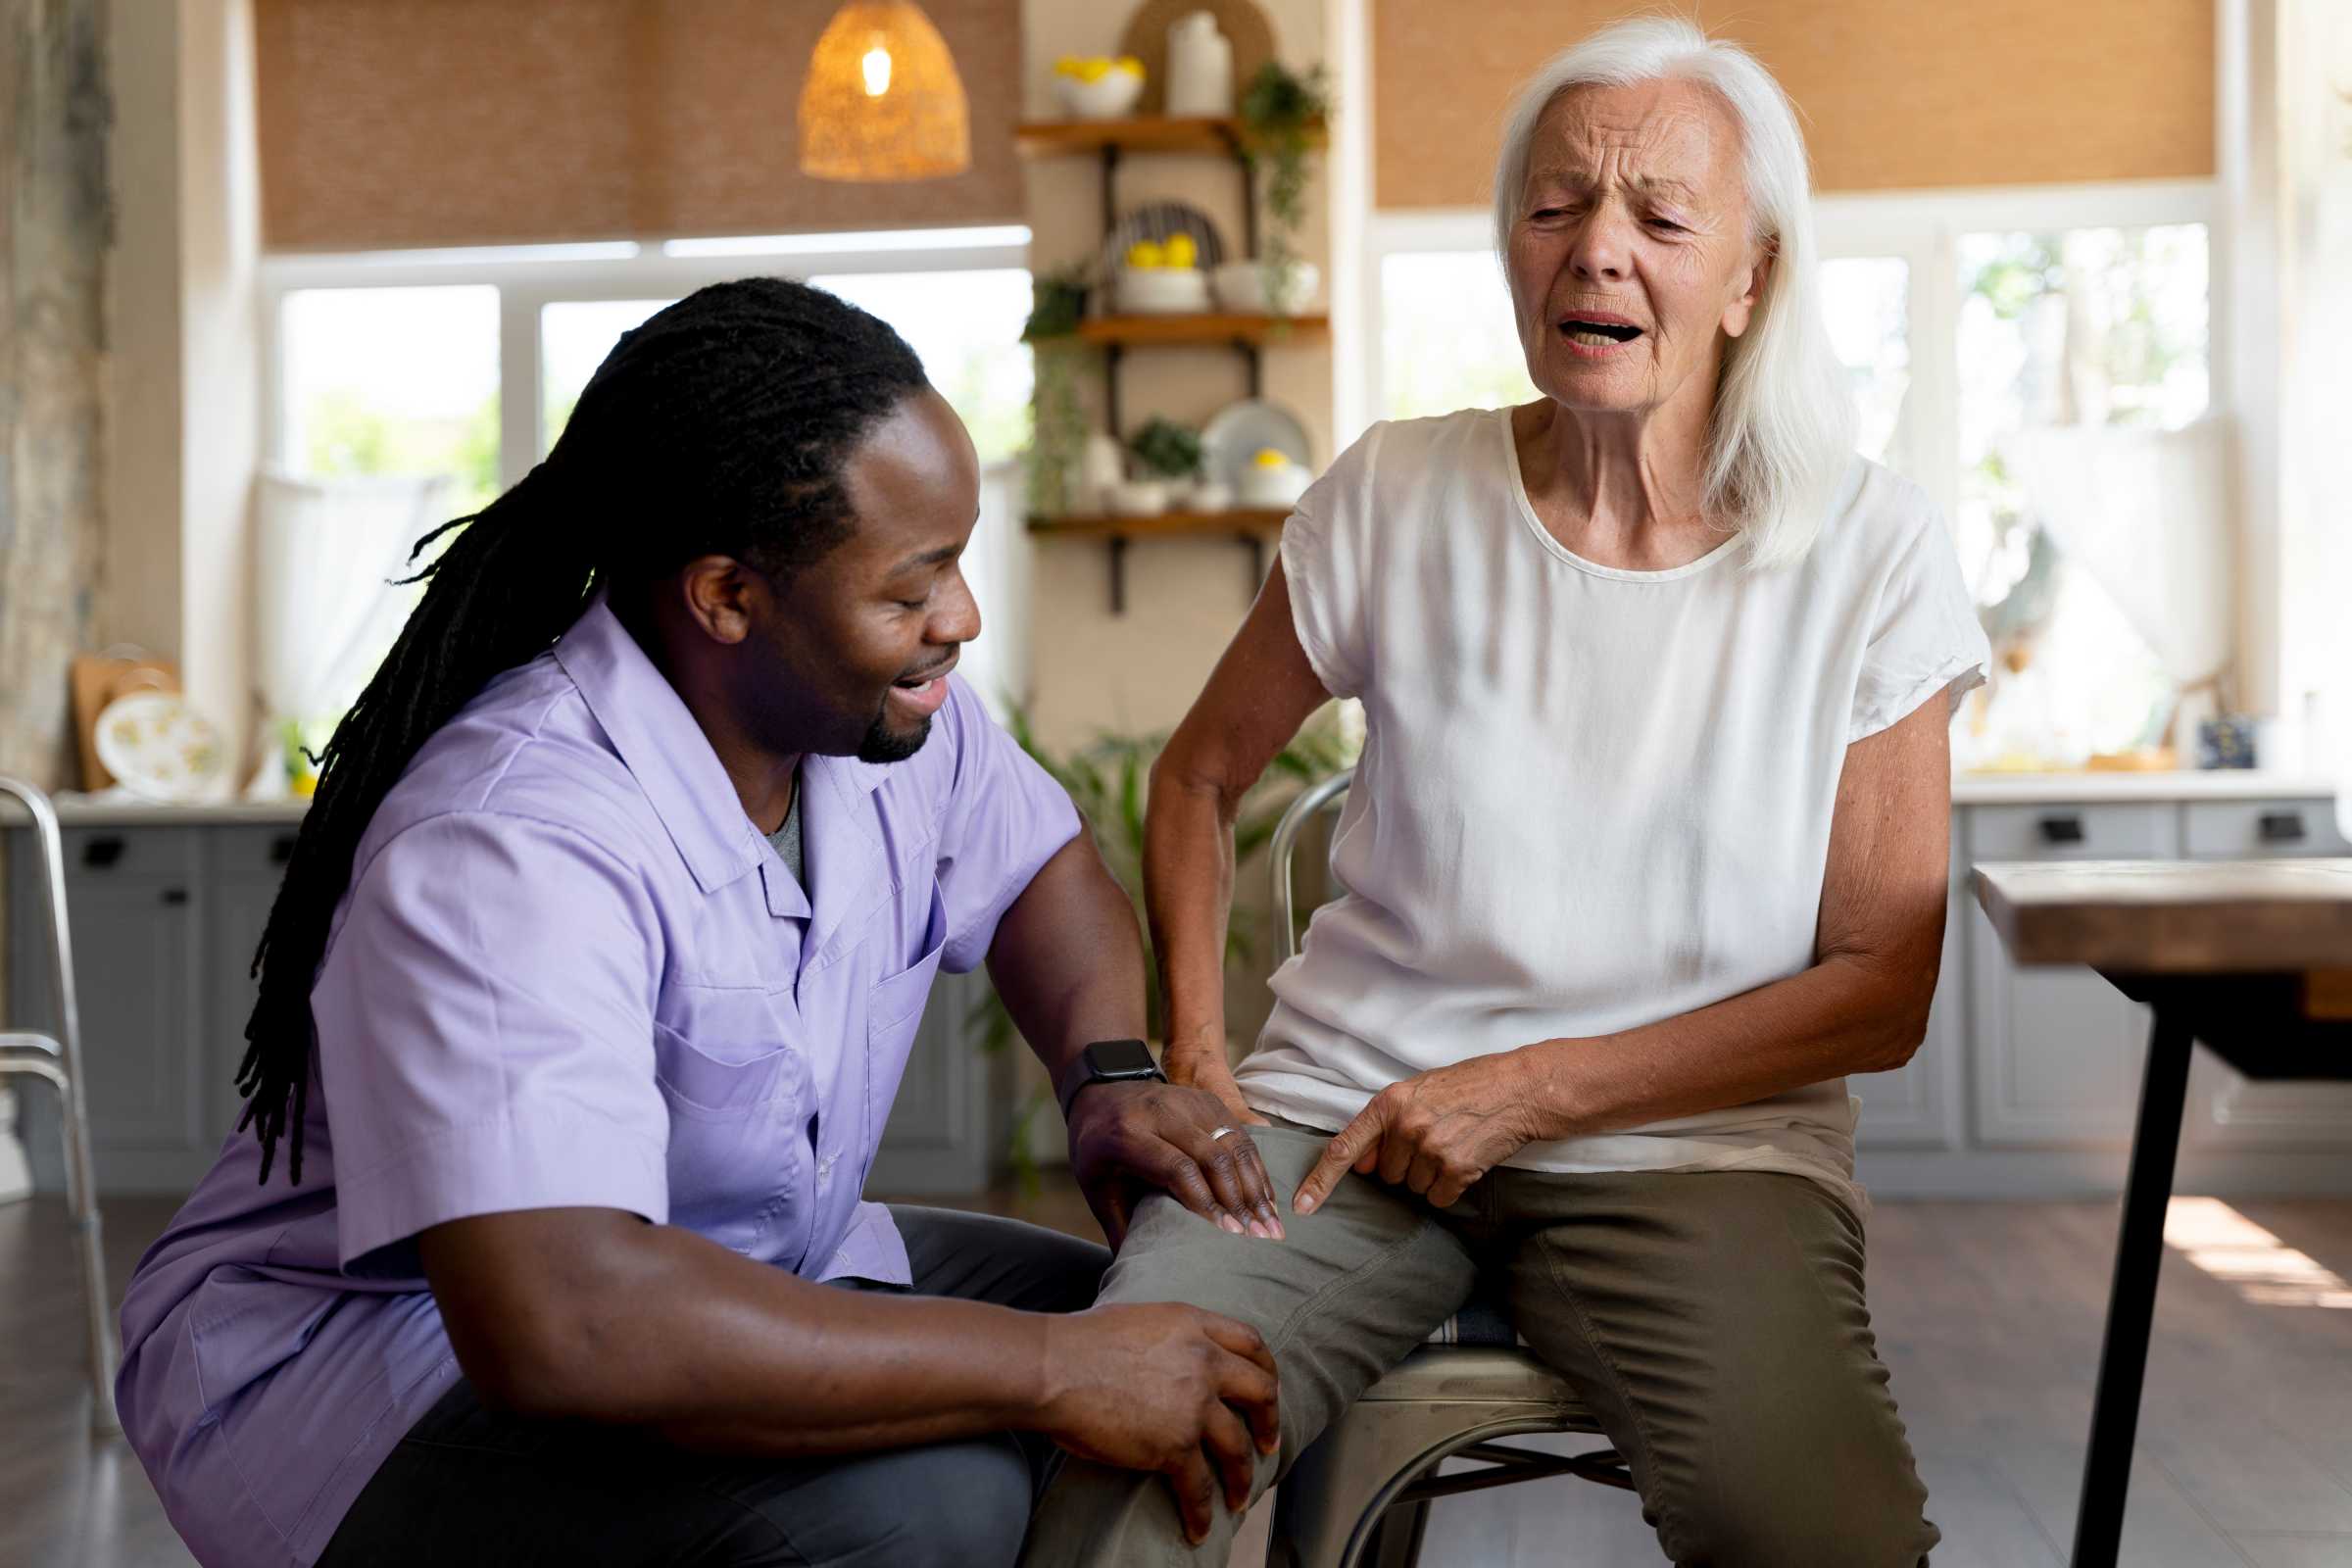 If you would like to learn more about our services or connect with one of our dedicated carers, simply fill out the form on our contact page. Our experienced team will promptly respond to your inquiry and provide you with the information you seek.